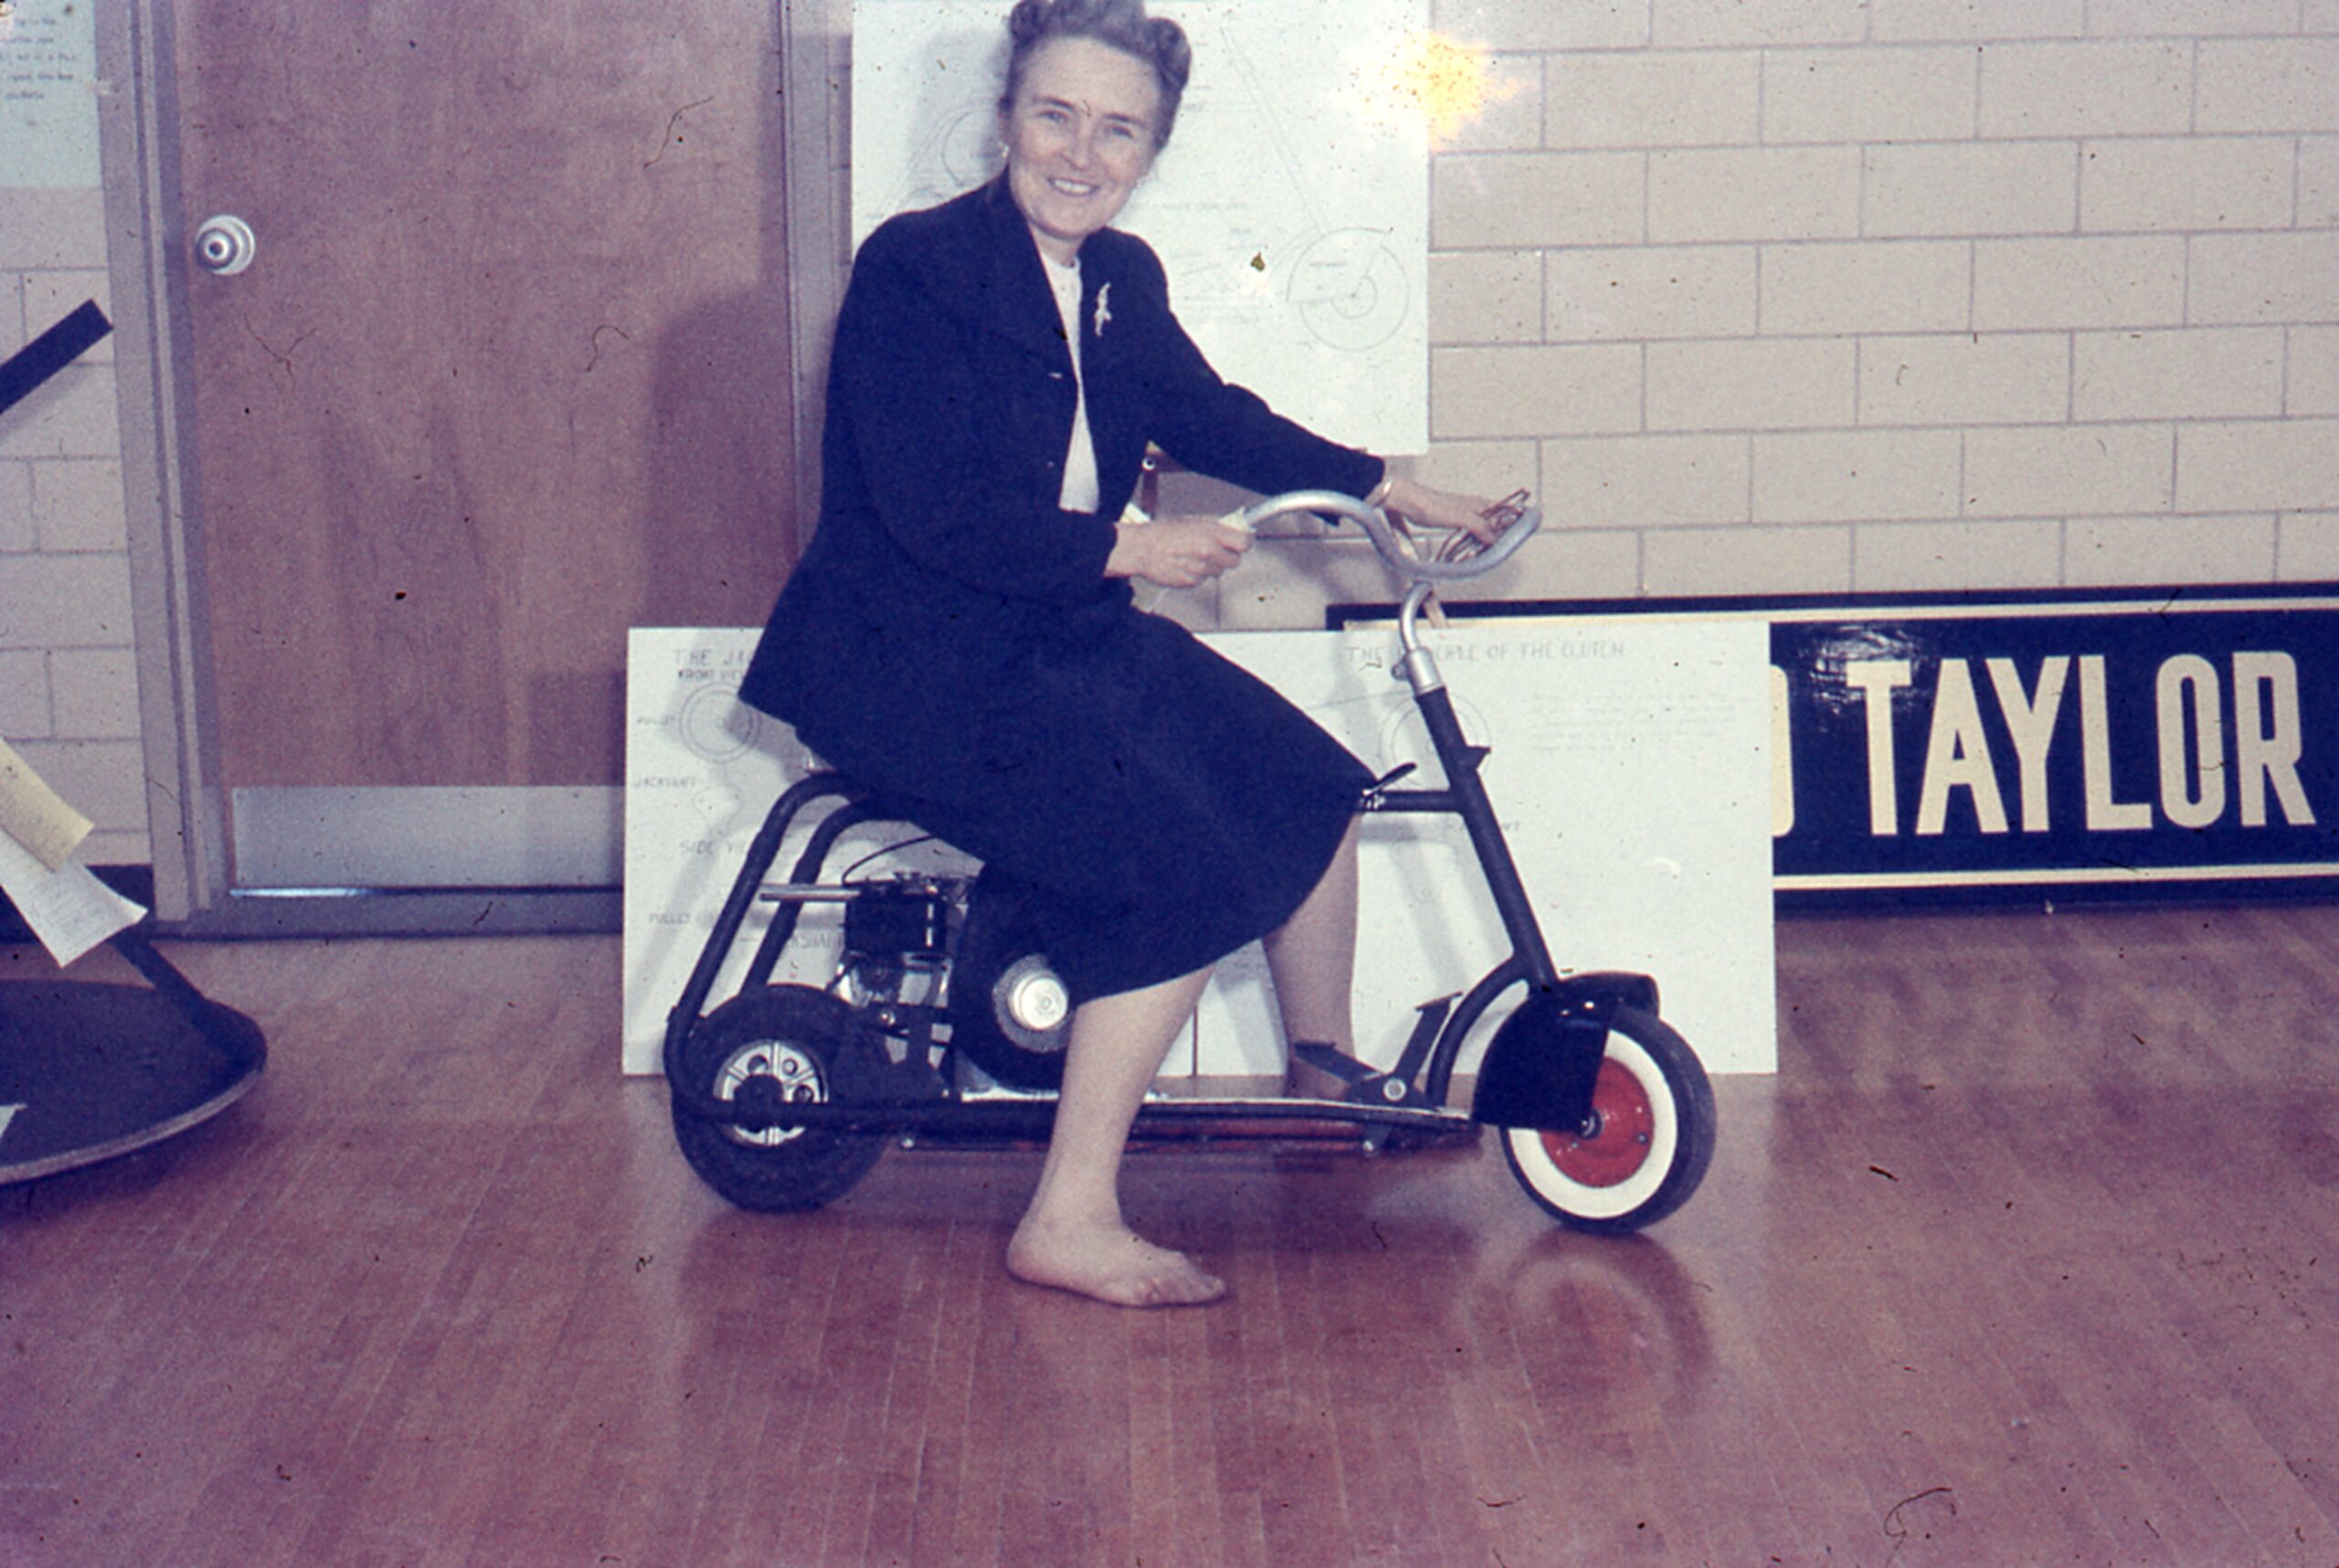 Dr. Phoebie Knipling riding a scooter at a Public School Science Fair.